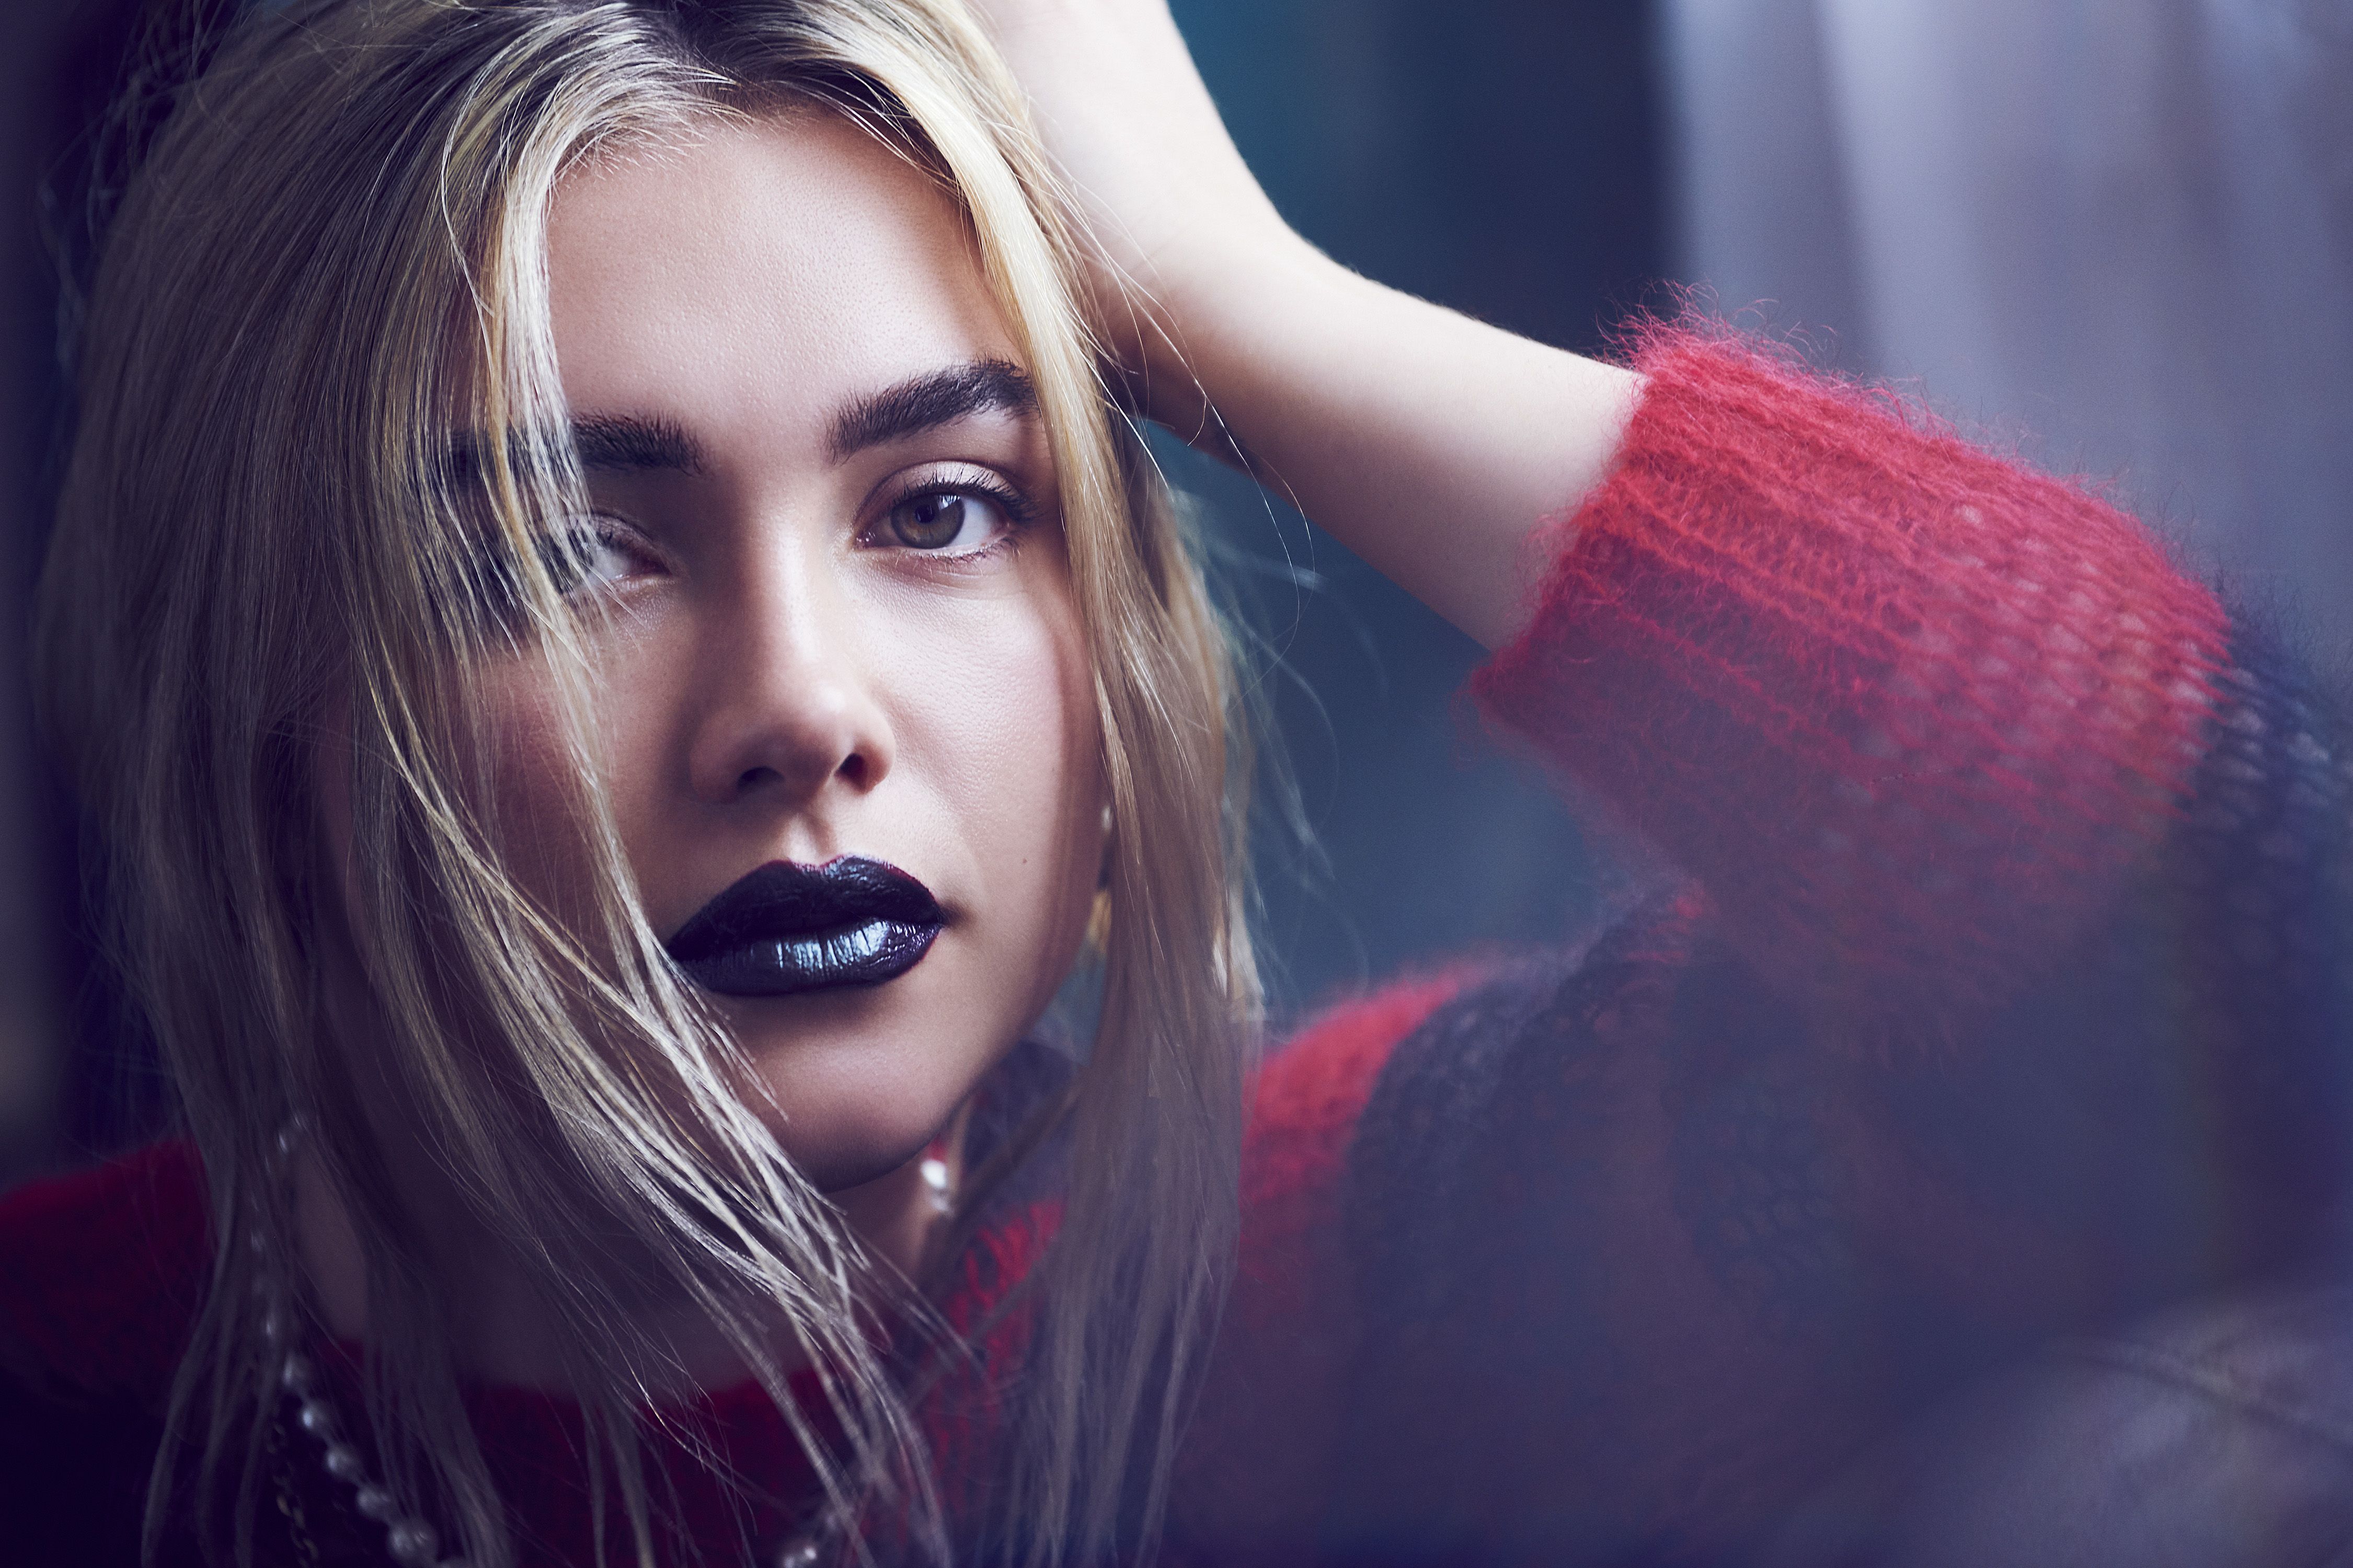 A woman with black lipstick and a red sweater - Florence Pugh